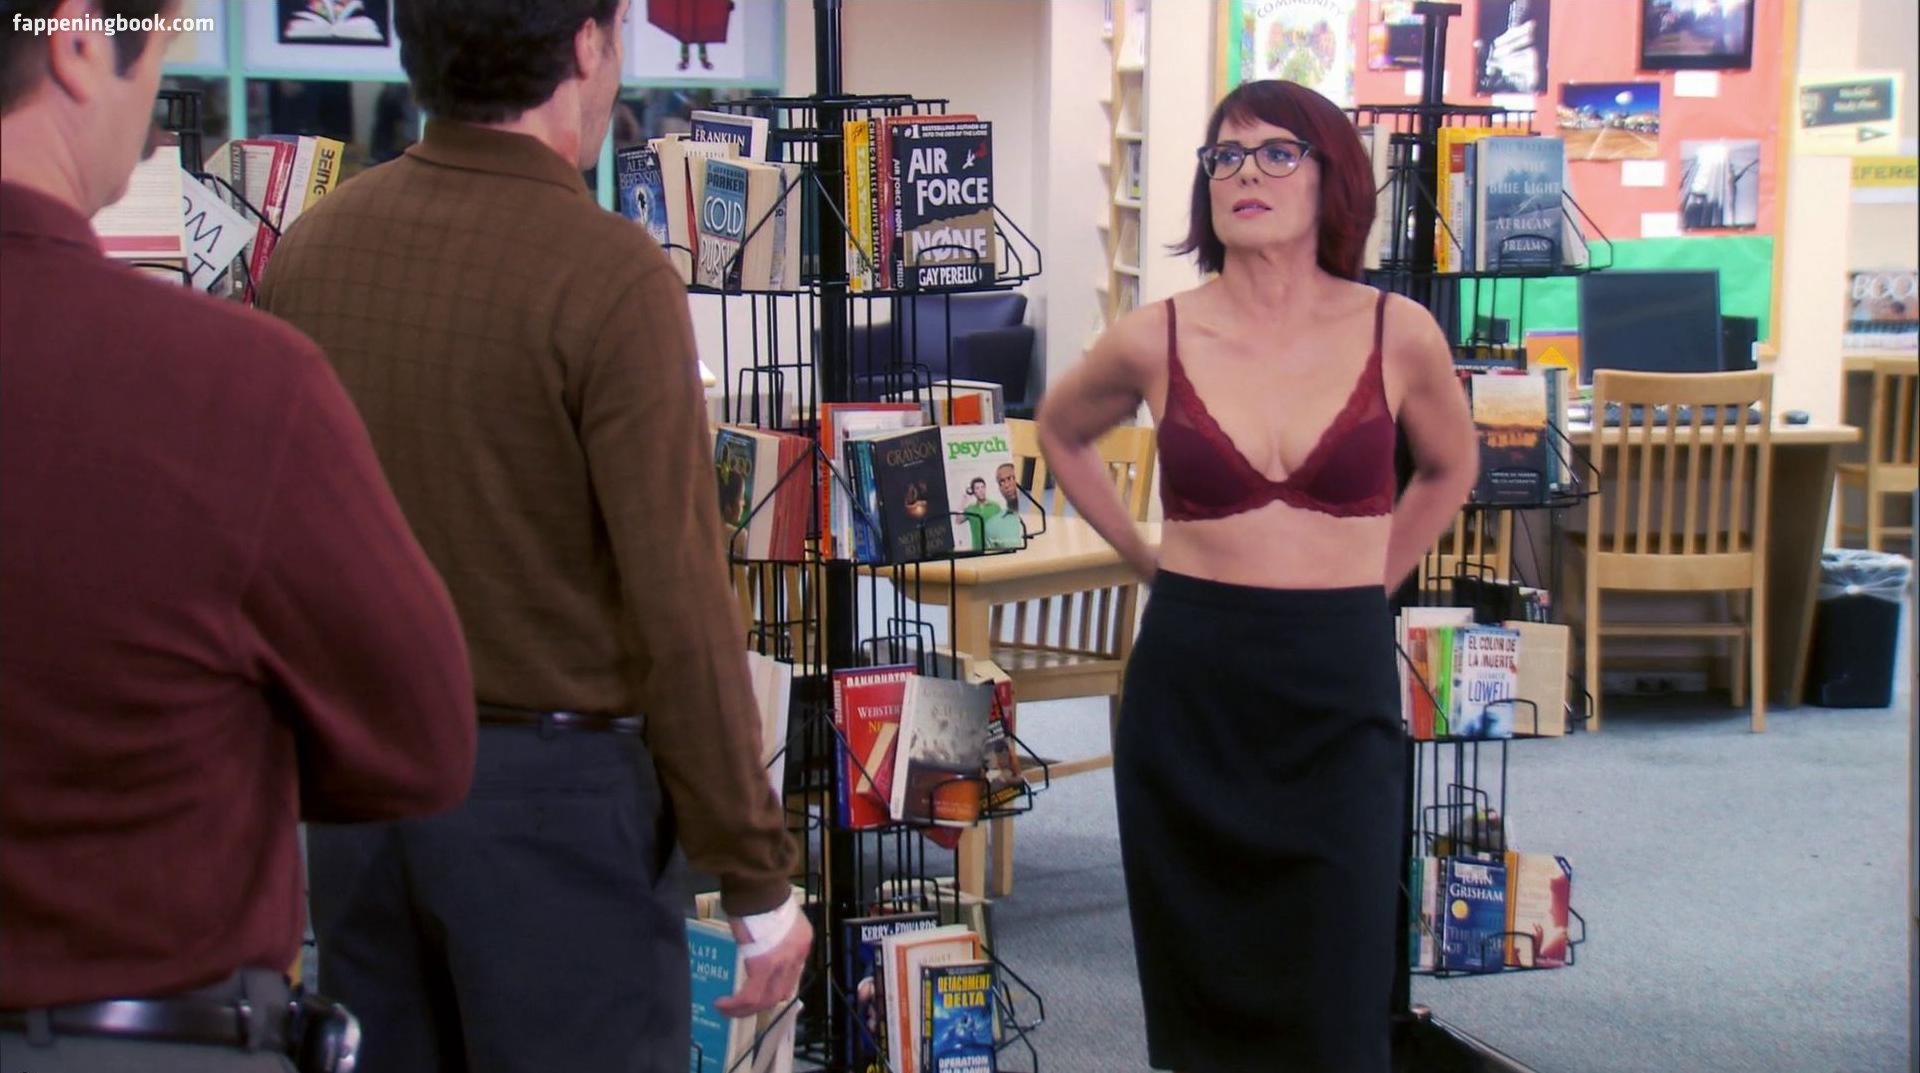 Megan Mullally Nude, The Fappening - Photo #378295 - FappeningBook.